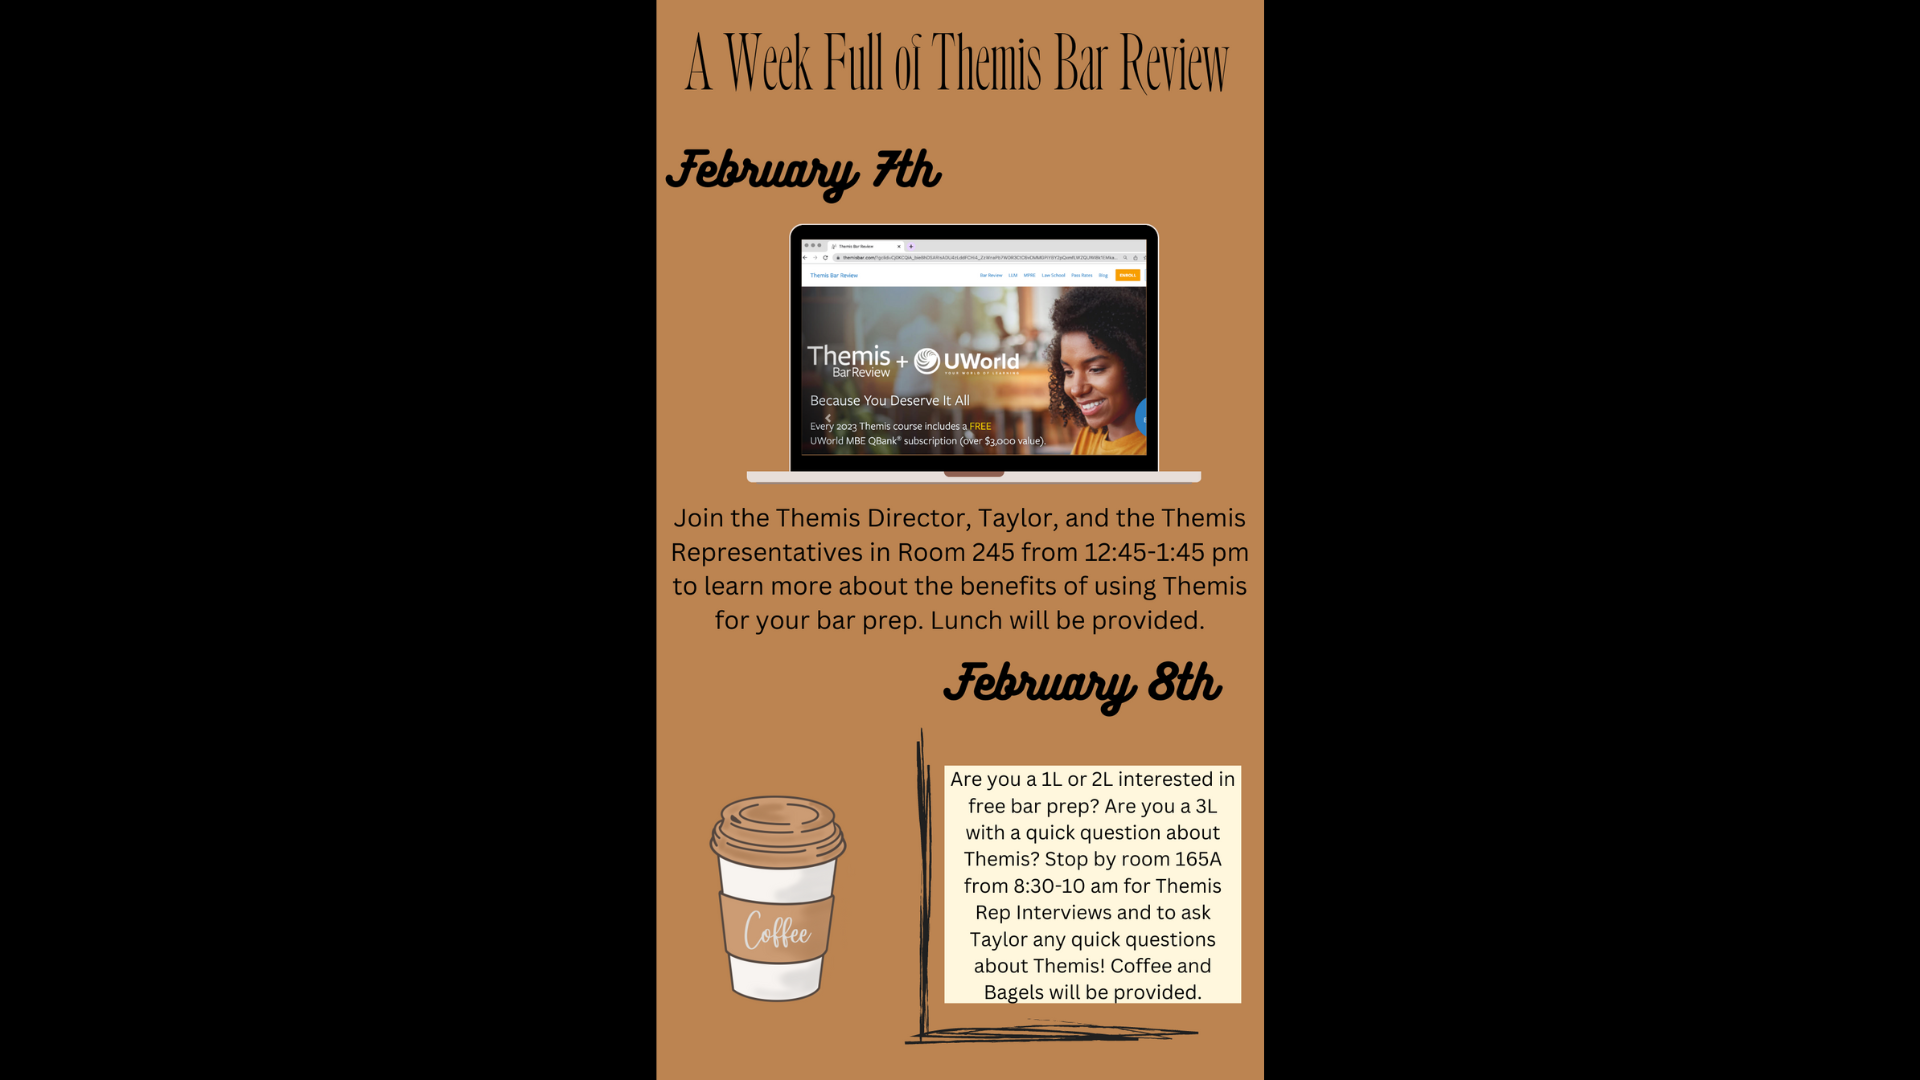 Join the Themis Director, Taylor, on February 7th from 12:45-1:45 pm in Room 245 to find out why Themis Bar Prep is the best Bar Prep company for you. Lunch will be provided.        Also join Taylor on February 8th room 8:30-10 am in room 165A for coffee and bagels. She will be discussing how to get free bar prep as a Themis representative and answering any and all questions you may have about Themis!